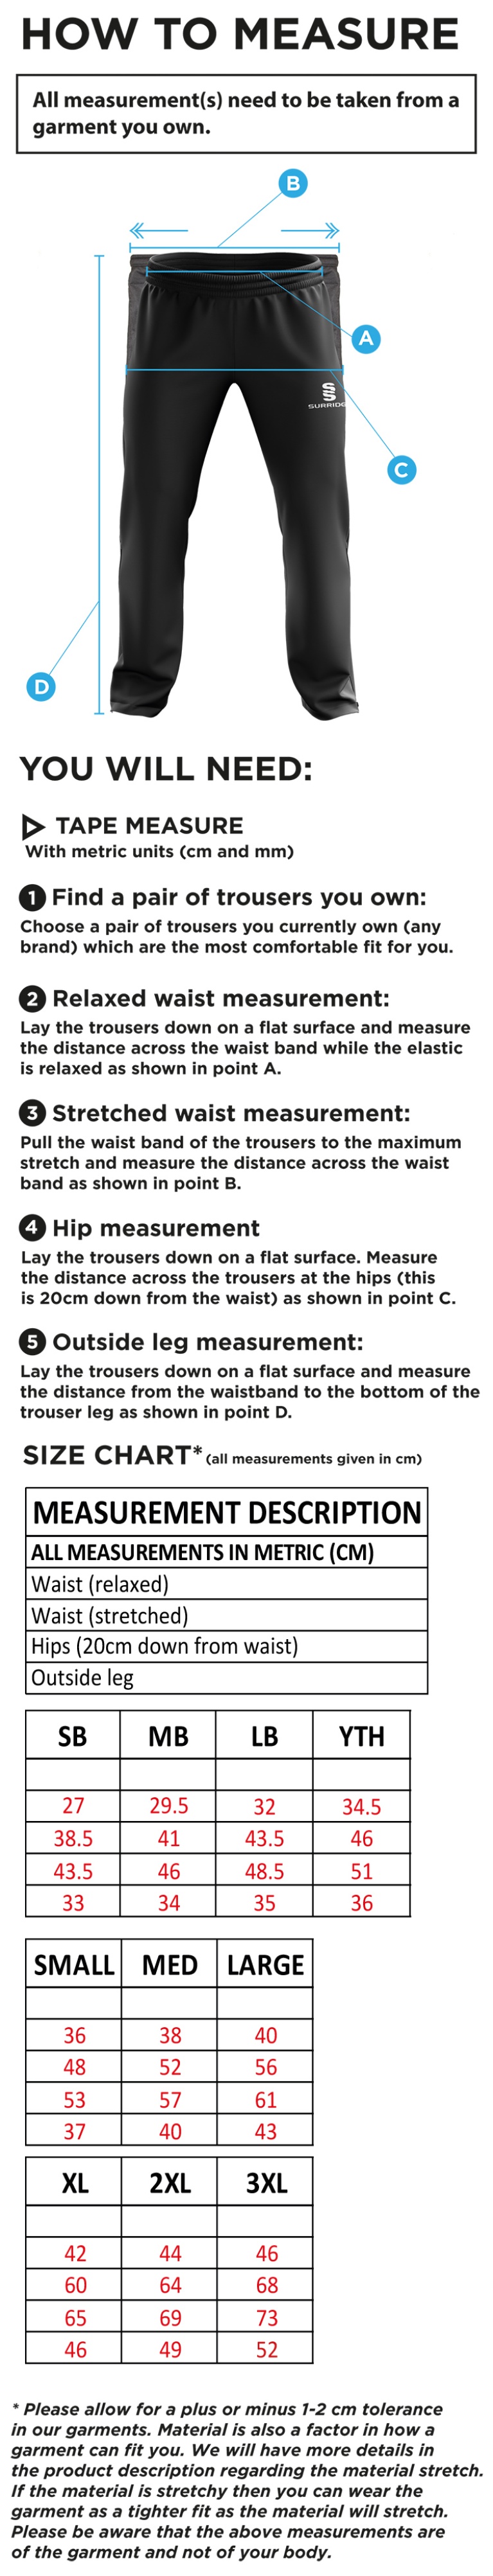 EAST ARDSLEY UTD CC - Ripstop Track Pants - Size Guide